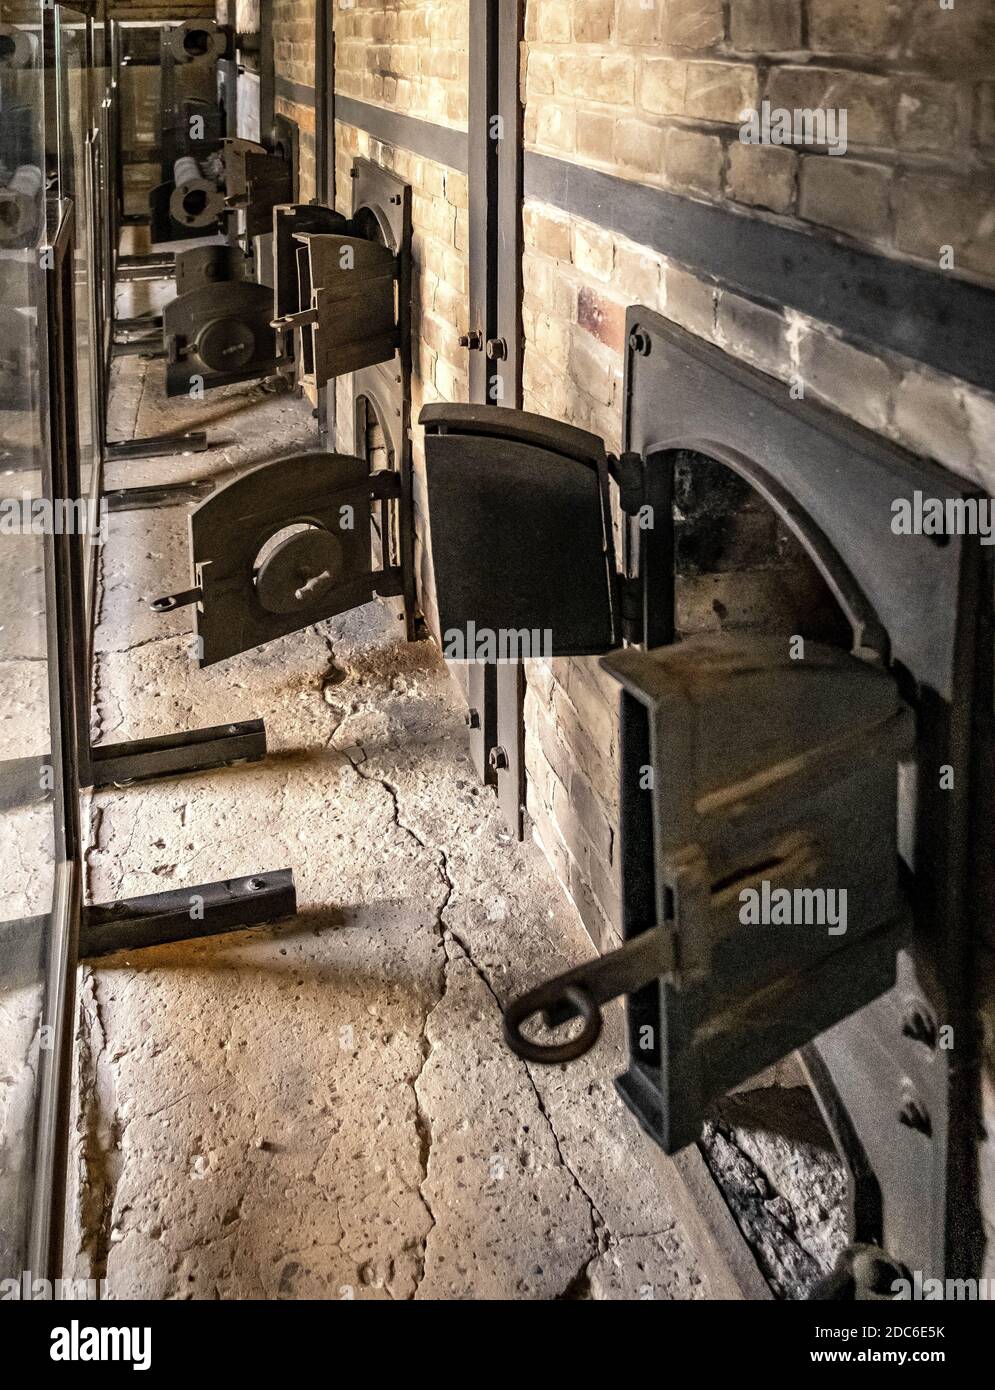 Lublin, Lubelskie / Poland - 2019/08/17: Reconstructed crematorium ovens of Majdanek KL Lublin Nazis concentration and extermination camp - Konzentrat Stock Photo